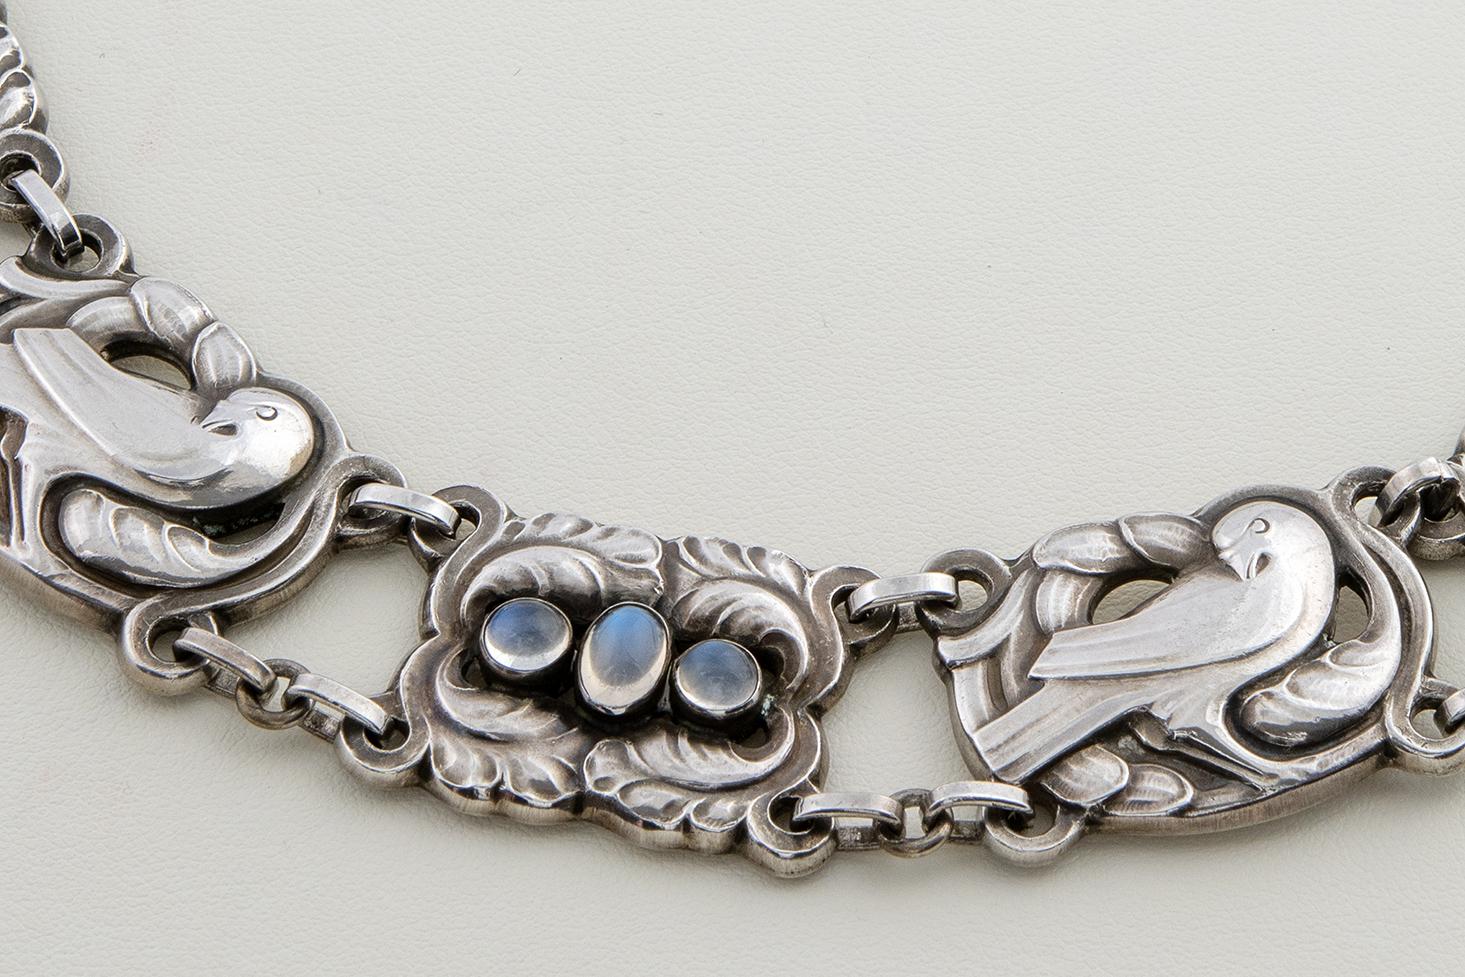 Georg Jensen Sterling Silver and moonstones 'Dove' Necklace No. 17. 

Originally designed by Georg Jensen in 1914.
(Post 1945 stamps)
